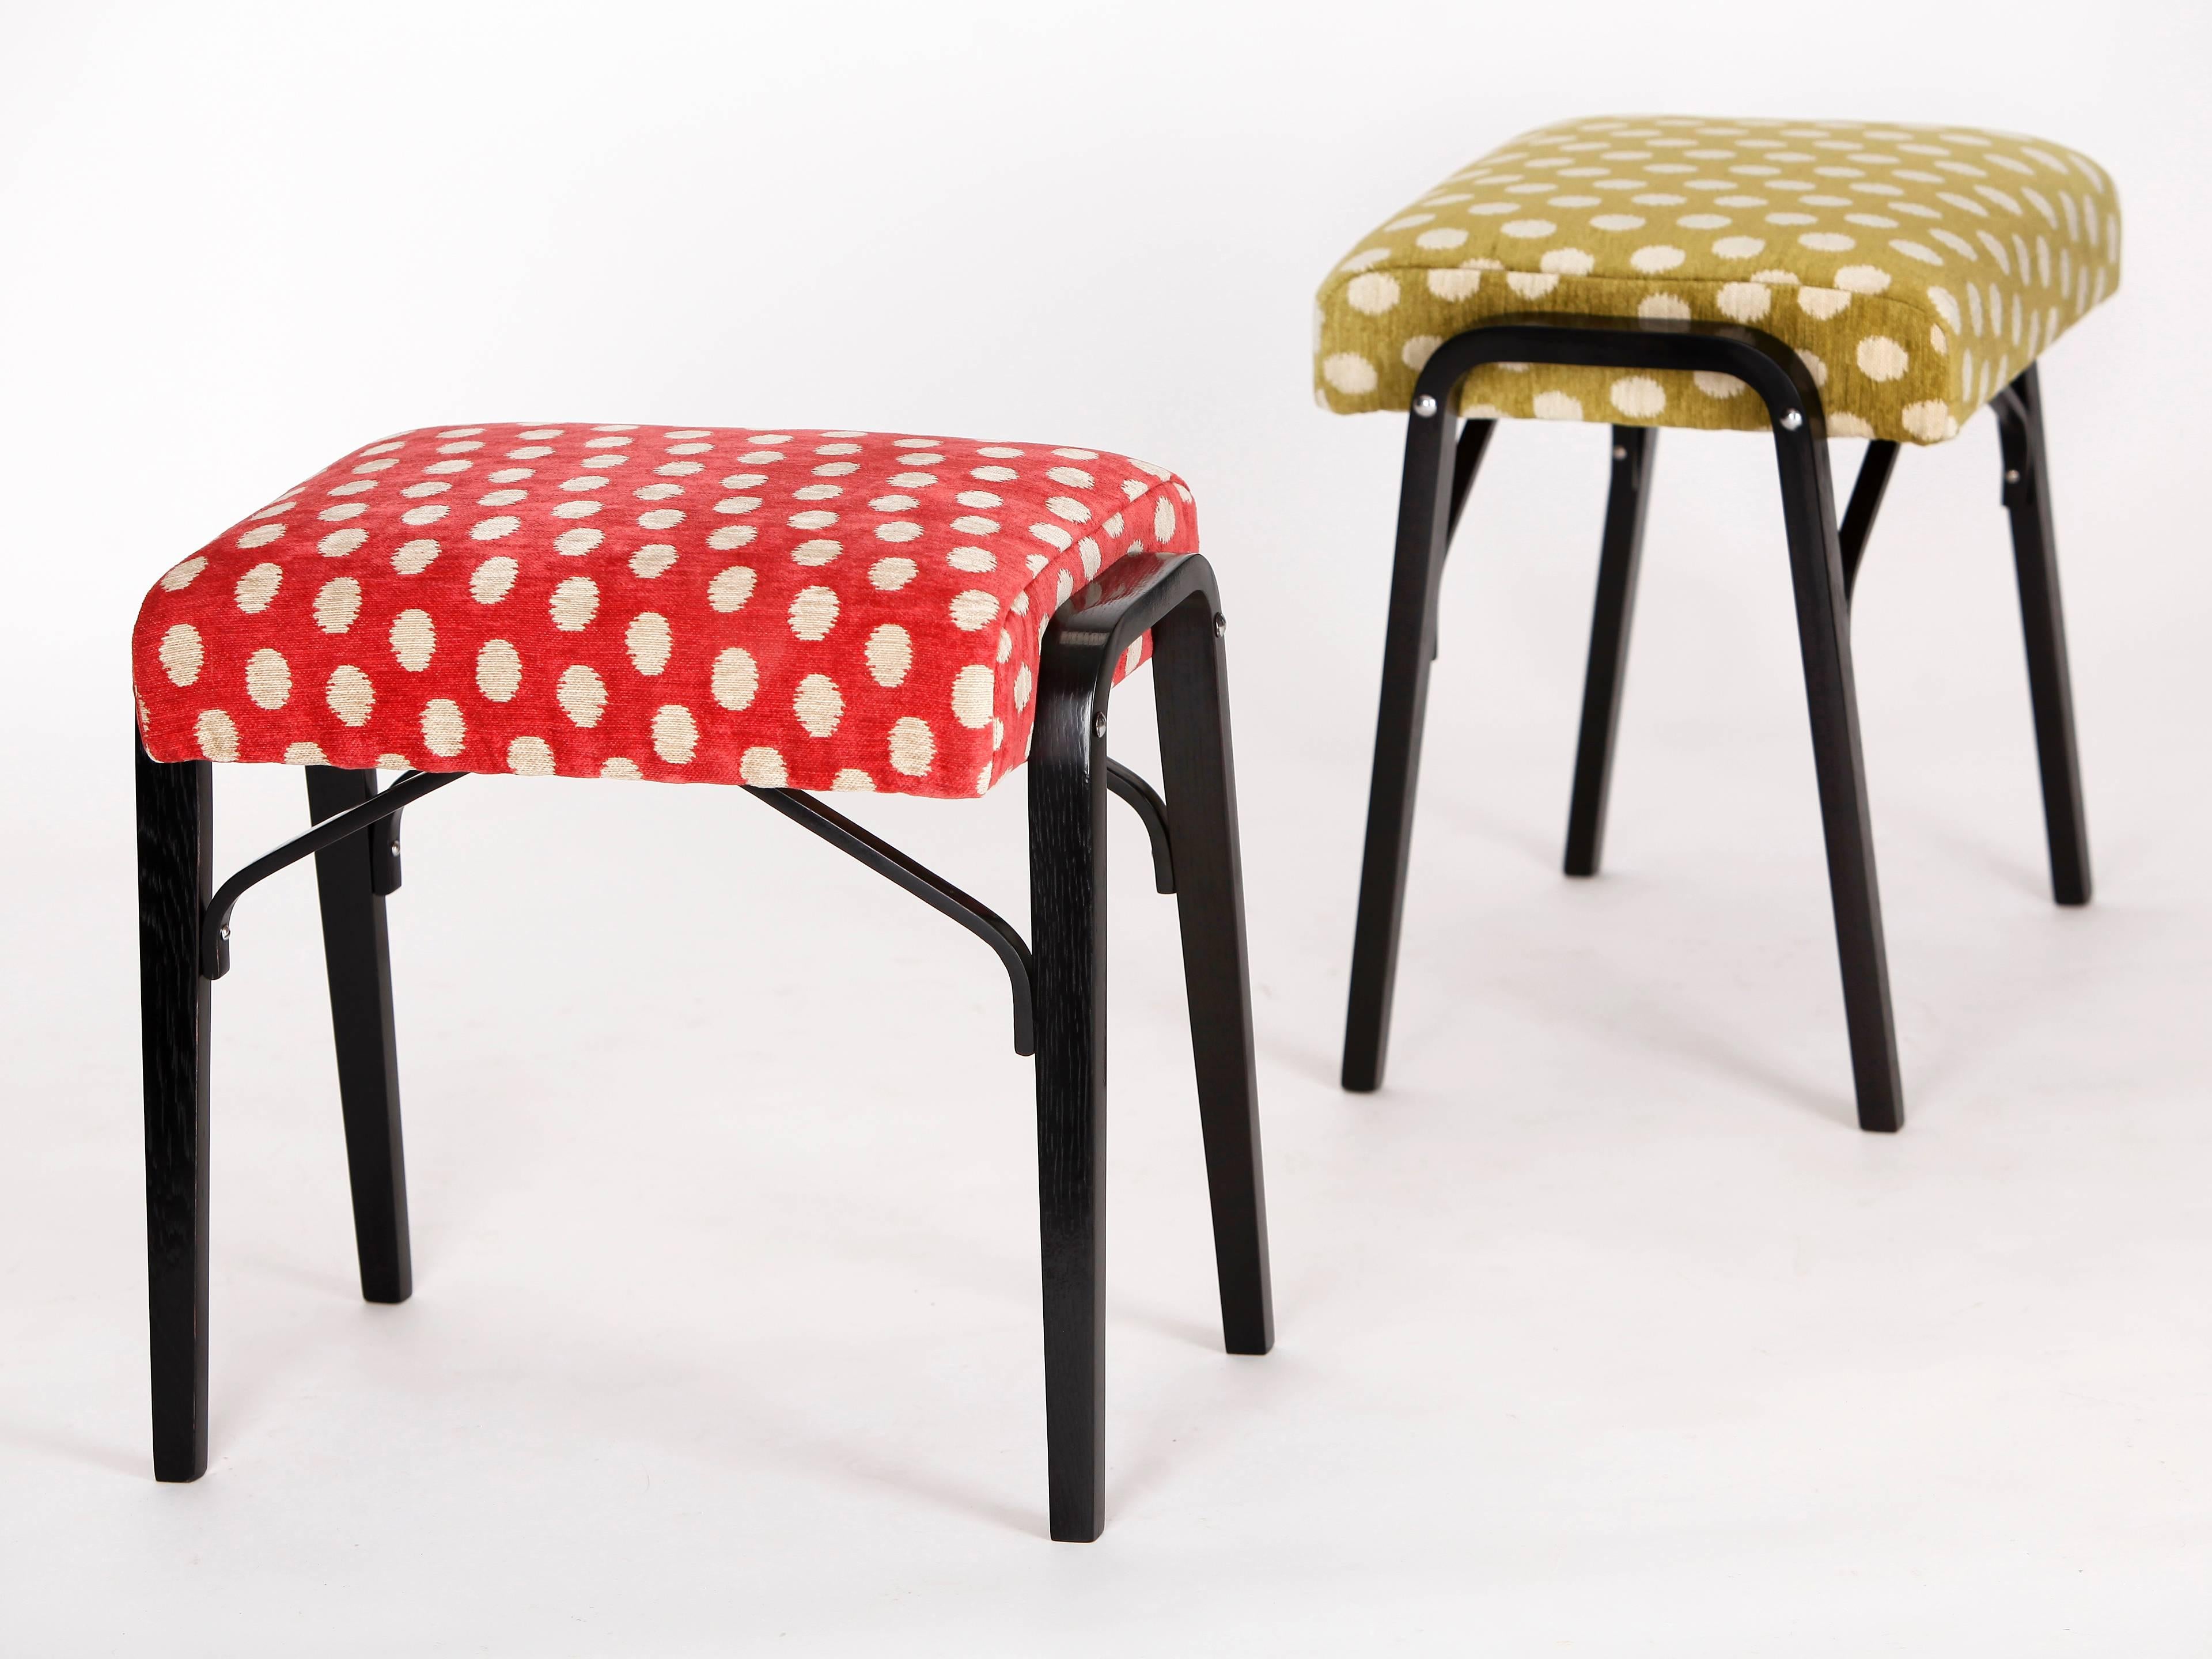 This pair of stools were designed and produced in the Czech Republic during the 1960s. They are made of newly painted bentwood. The upholstery is made from wool and the textile for the seats comes from the brand Colefax and Fowler.